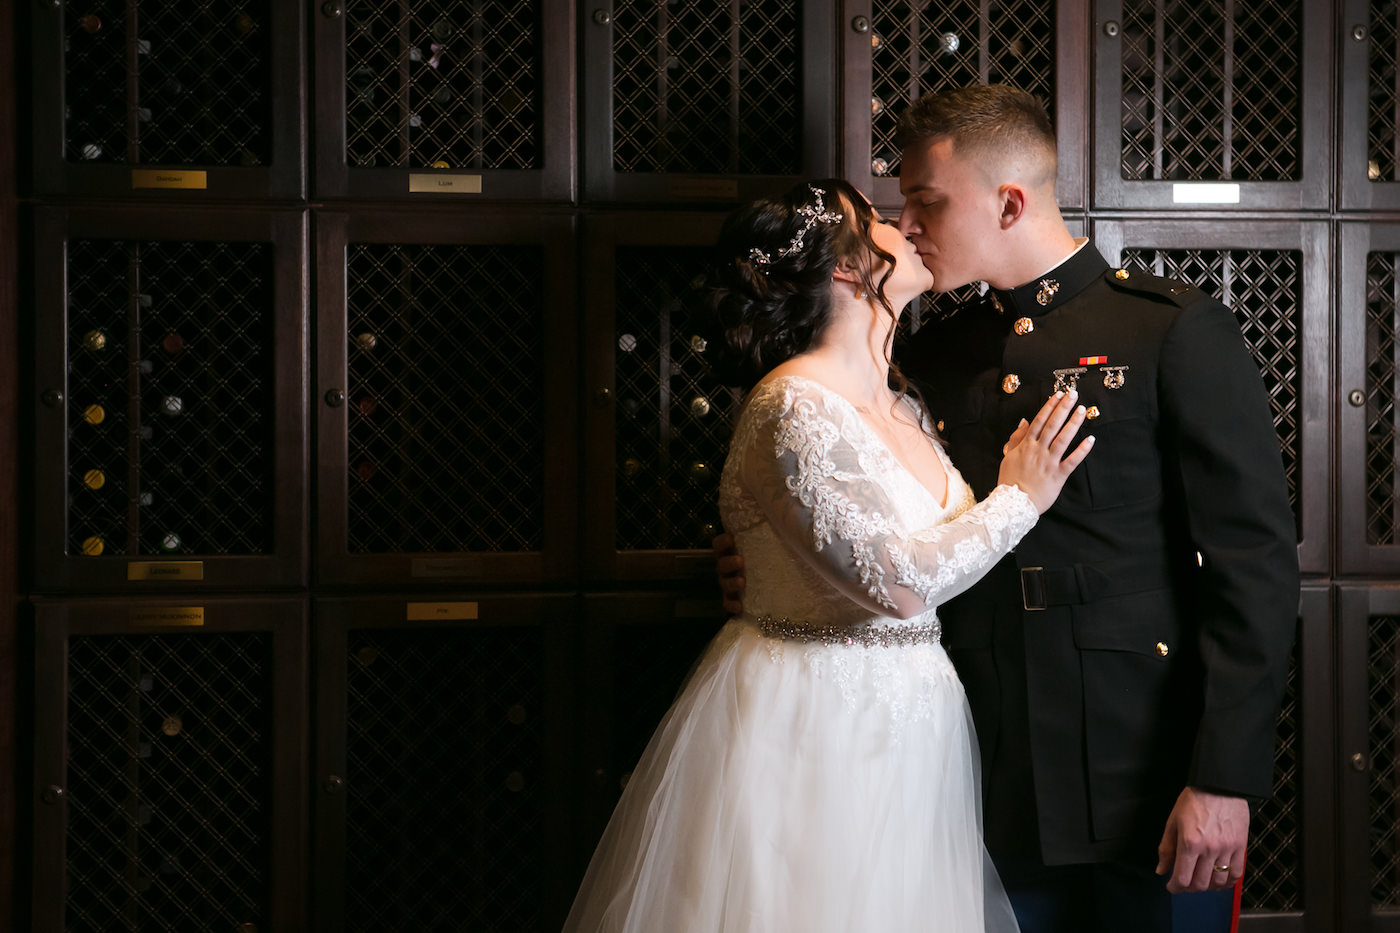 Romantic Classic Tampa Bride and Military Groom Kissing Wedding Portrait in Wine Cellar | Wedding Photographer Carrie Wildes Photography | Wedding Venue The Tampa Club